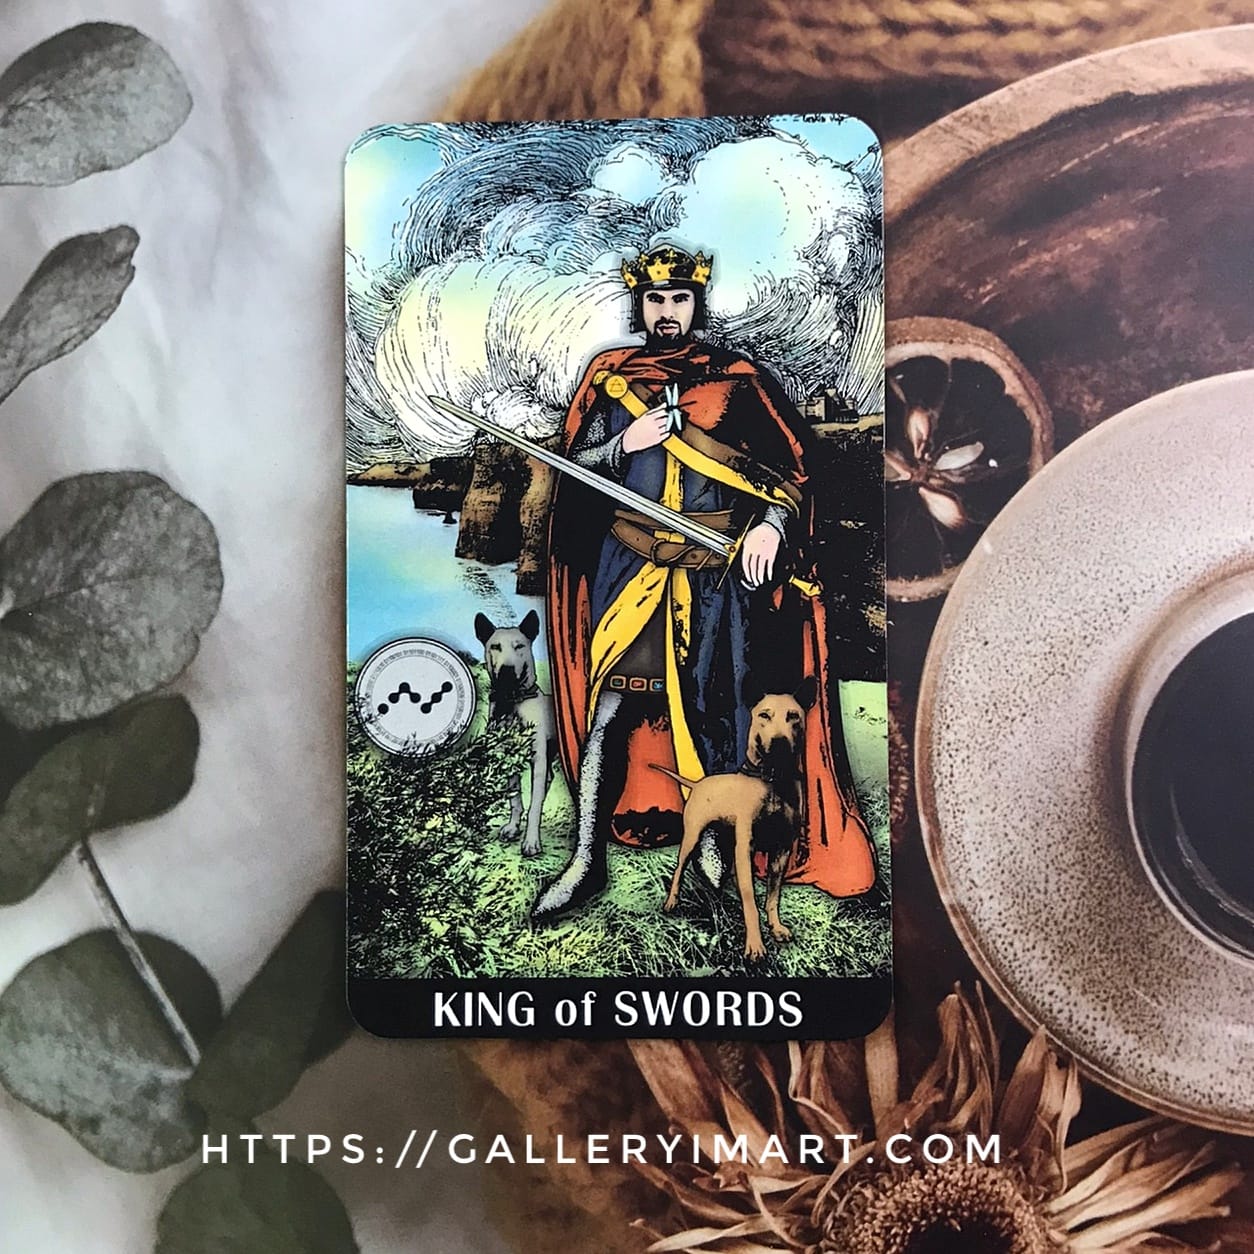 King of Swords Meaning